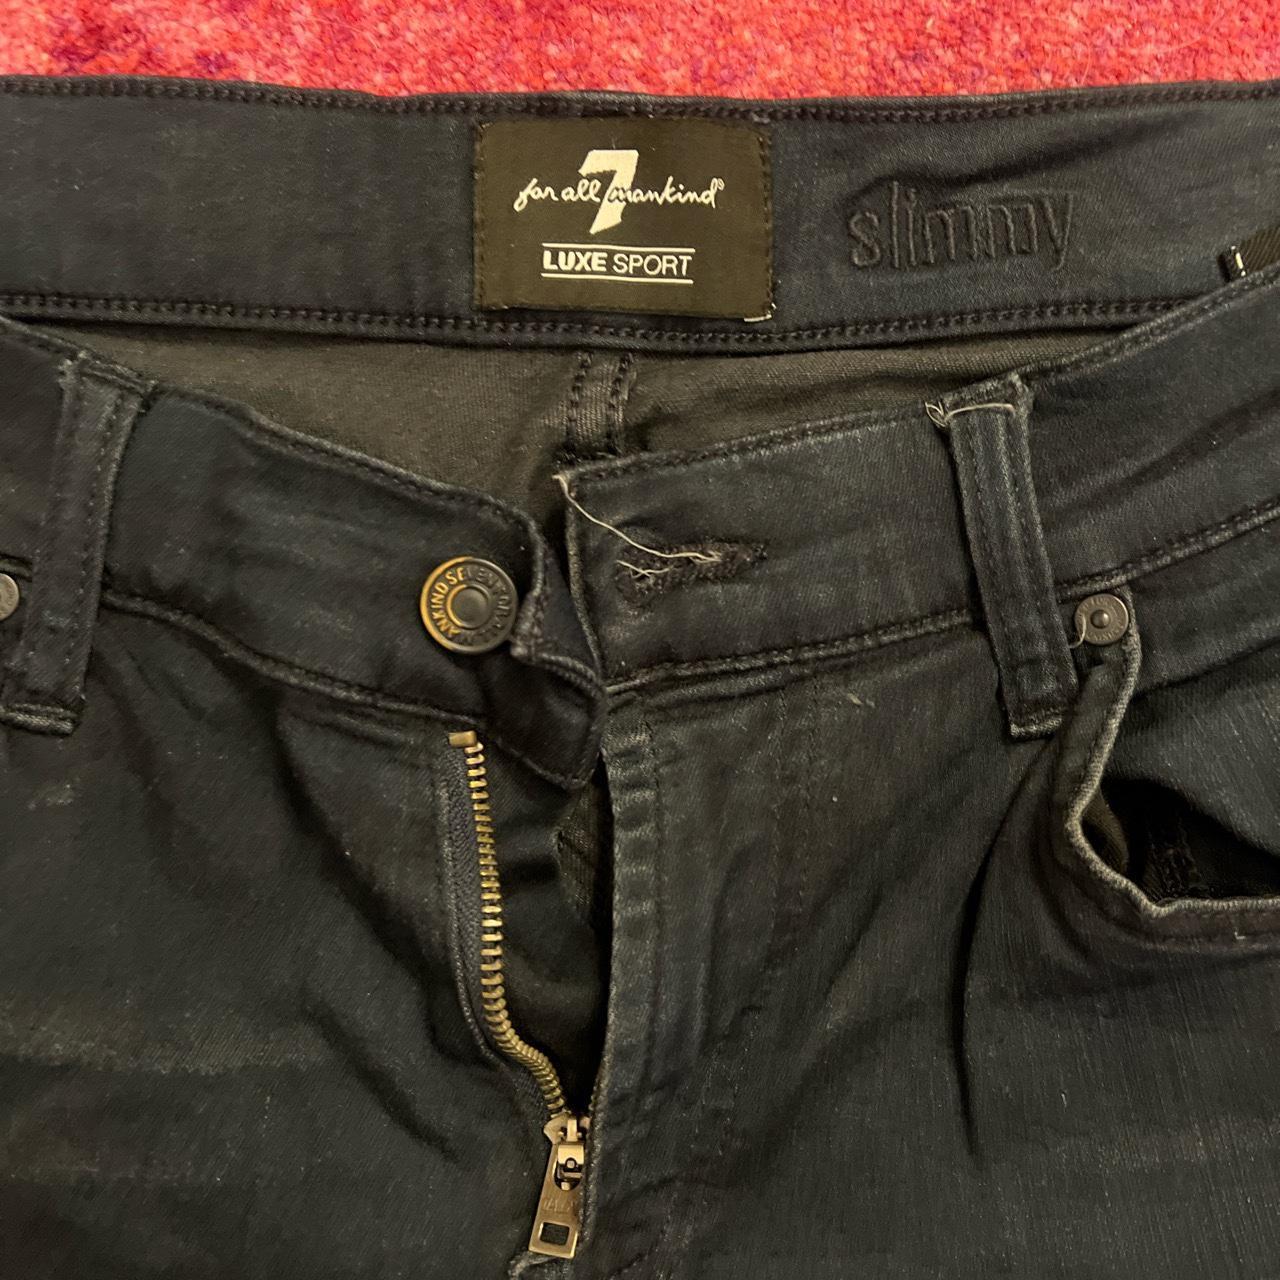 7 For All Mankind Luxe Sport Men’s Jean very soft,... - Depop